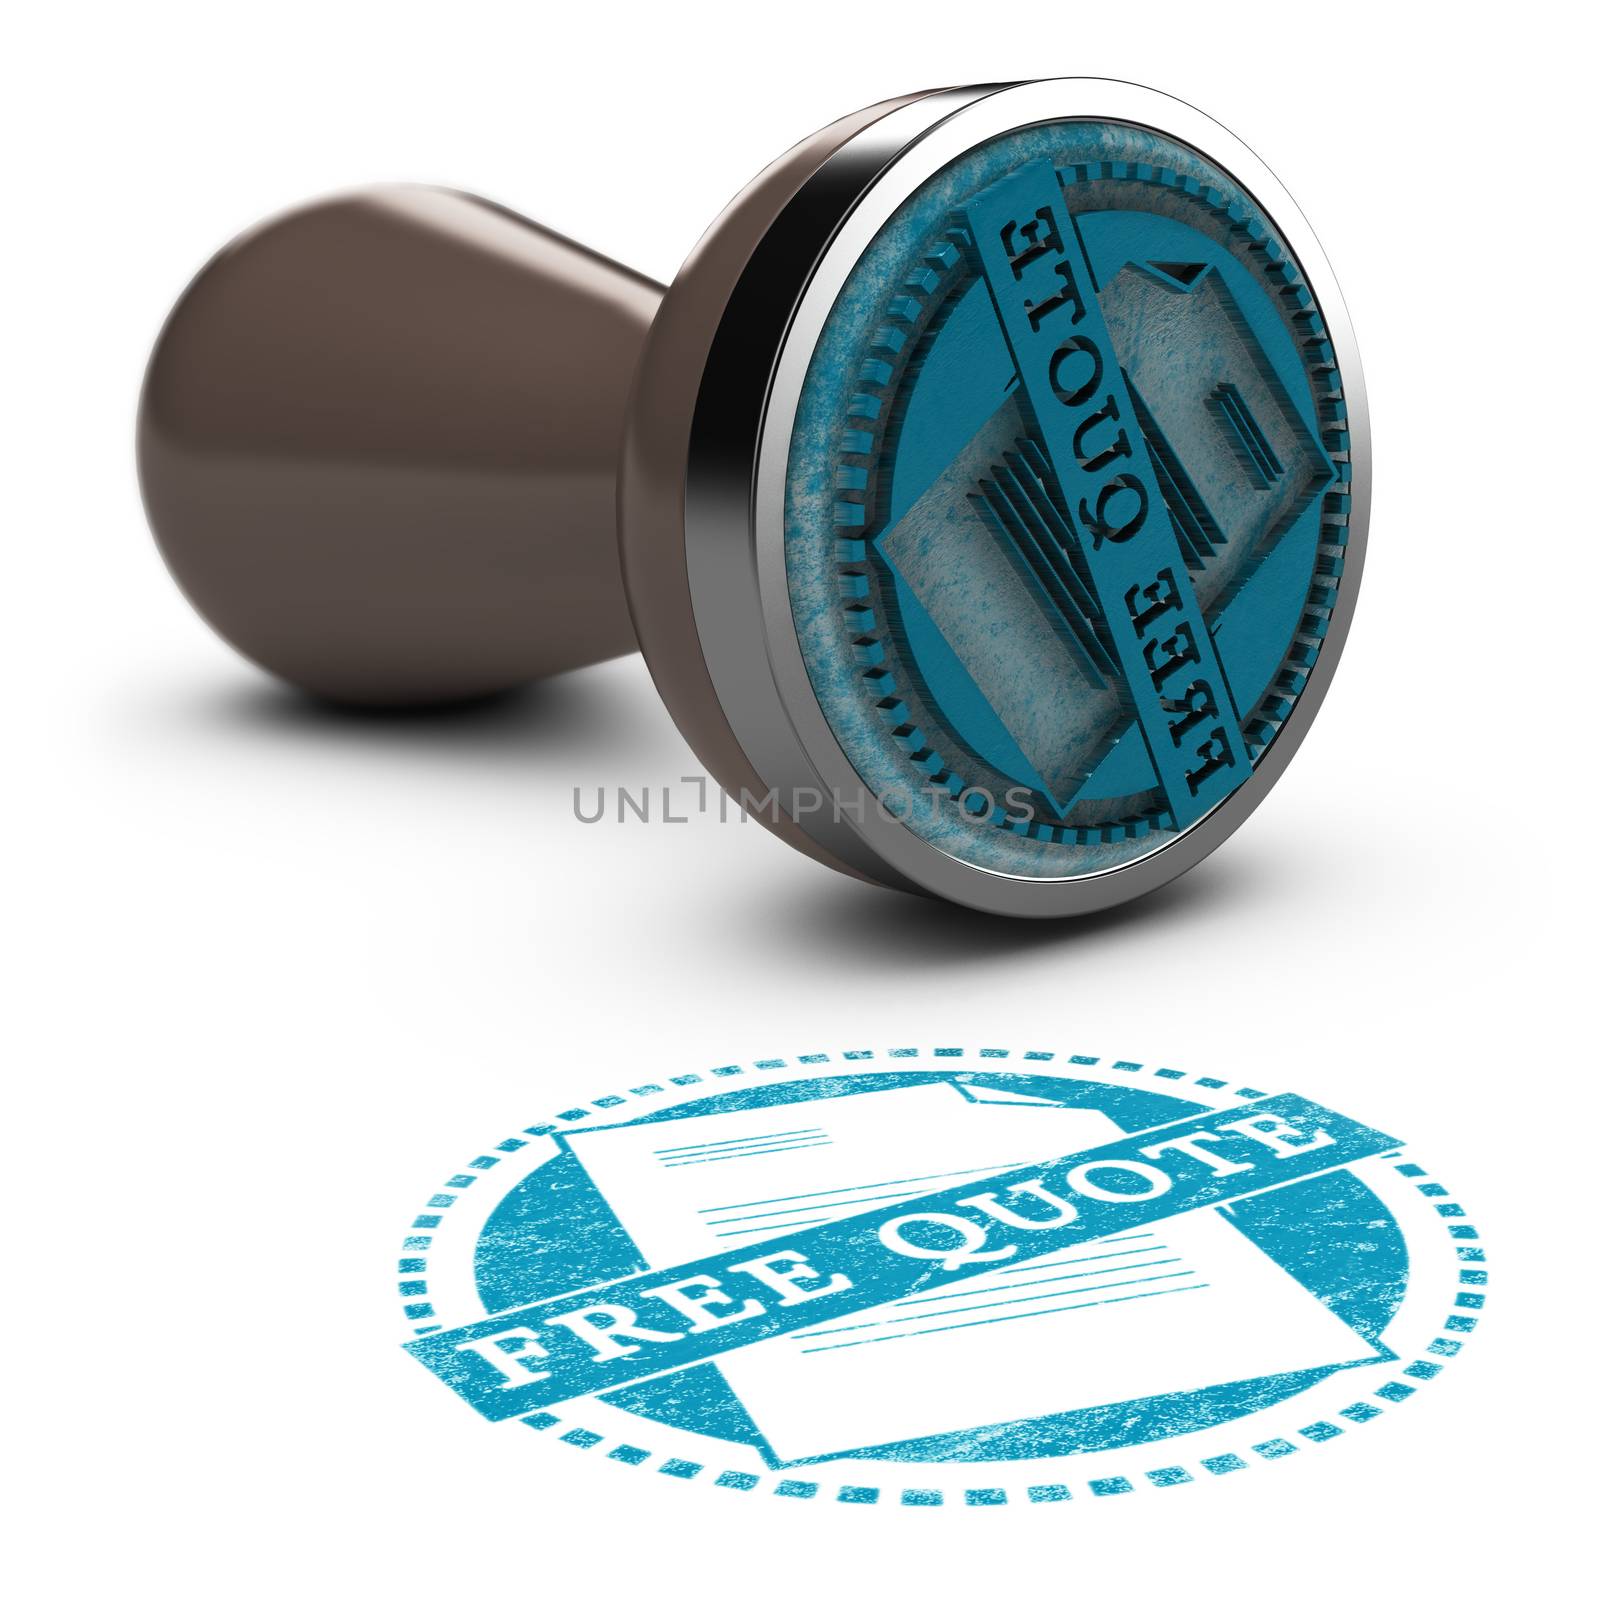 Rubber stamp over white background with the text free quote printed on it. Concept image for illustration of free quotation or estimate. Blue and brown tones.